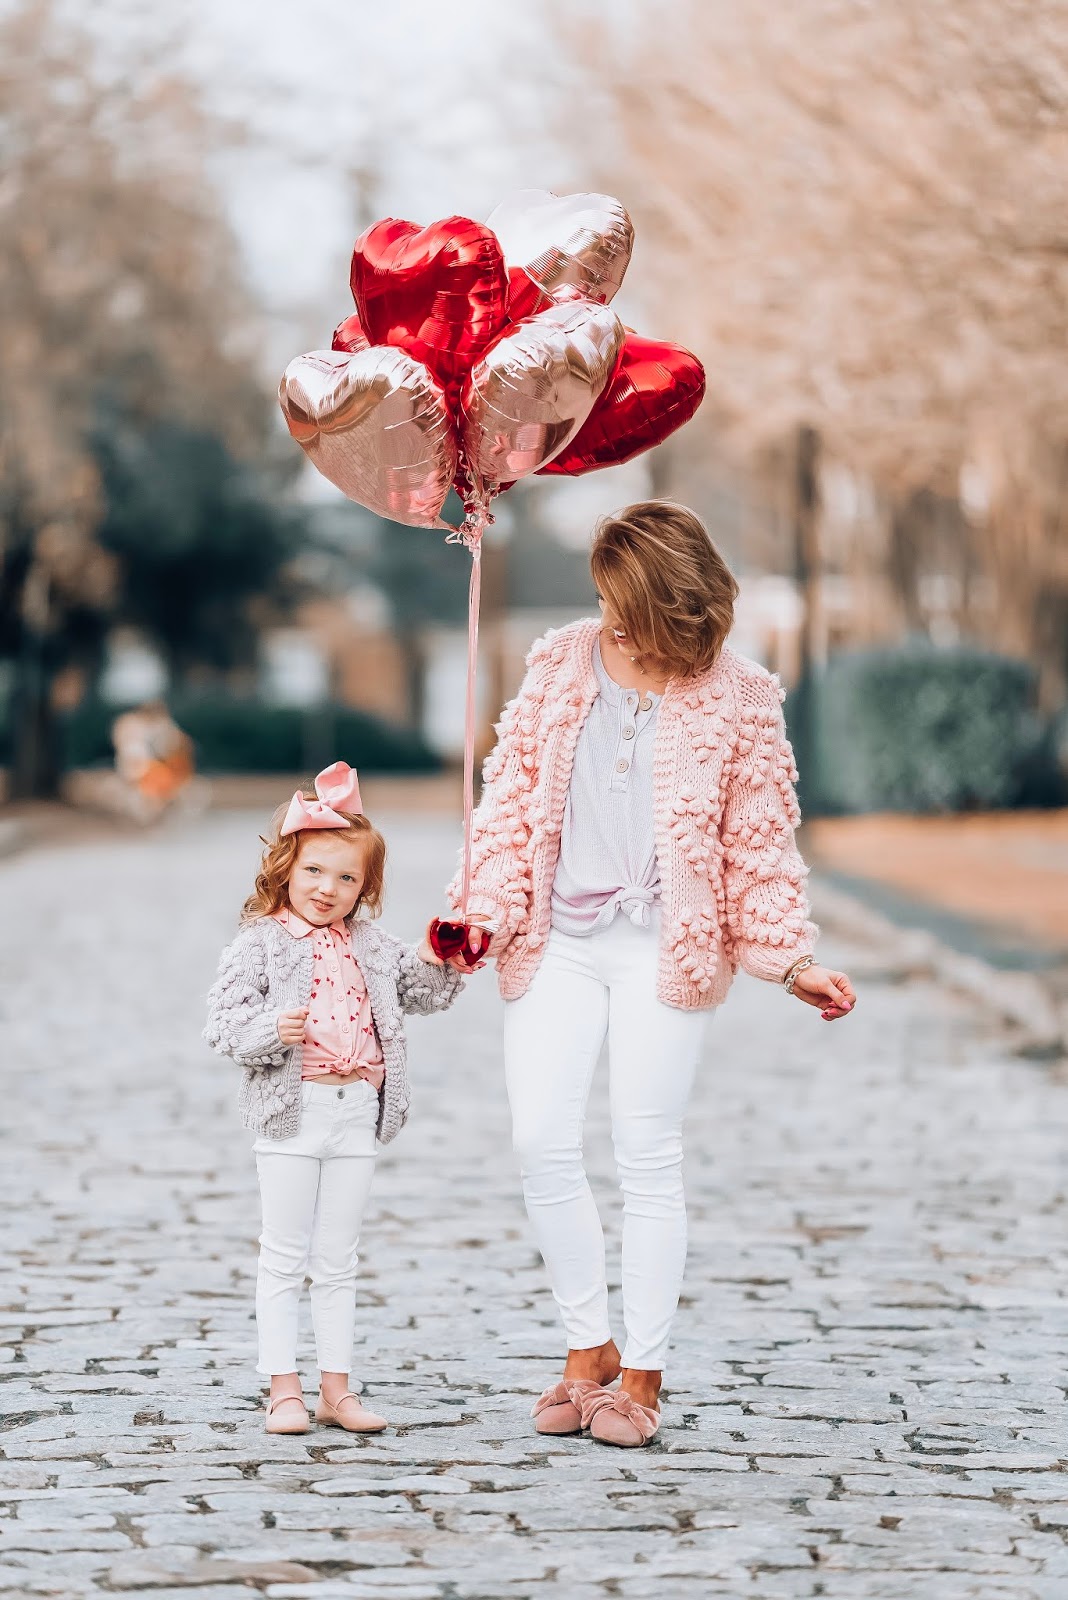 Valentine's Day 2019 + My Thoughts on Valentine's Day - Something Delightful Blog